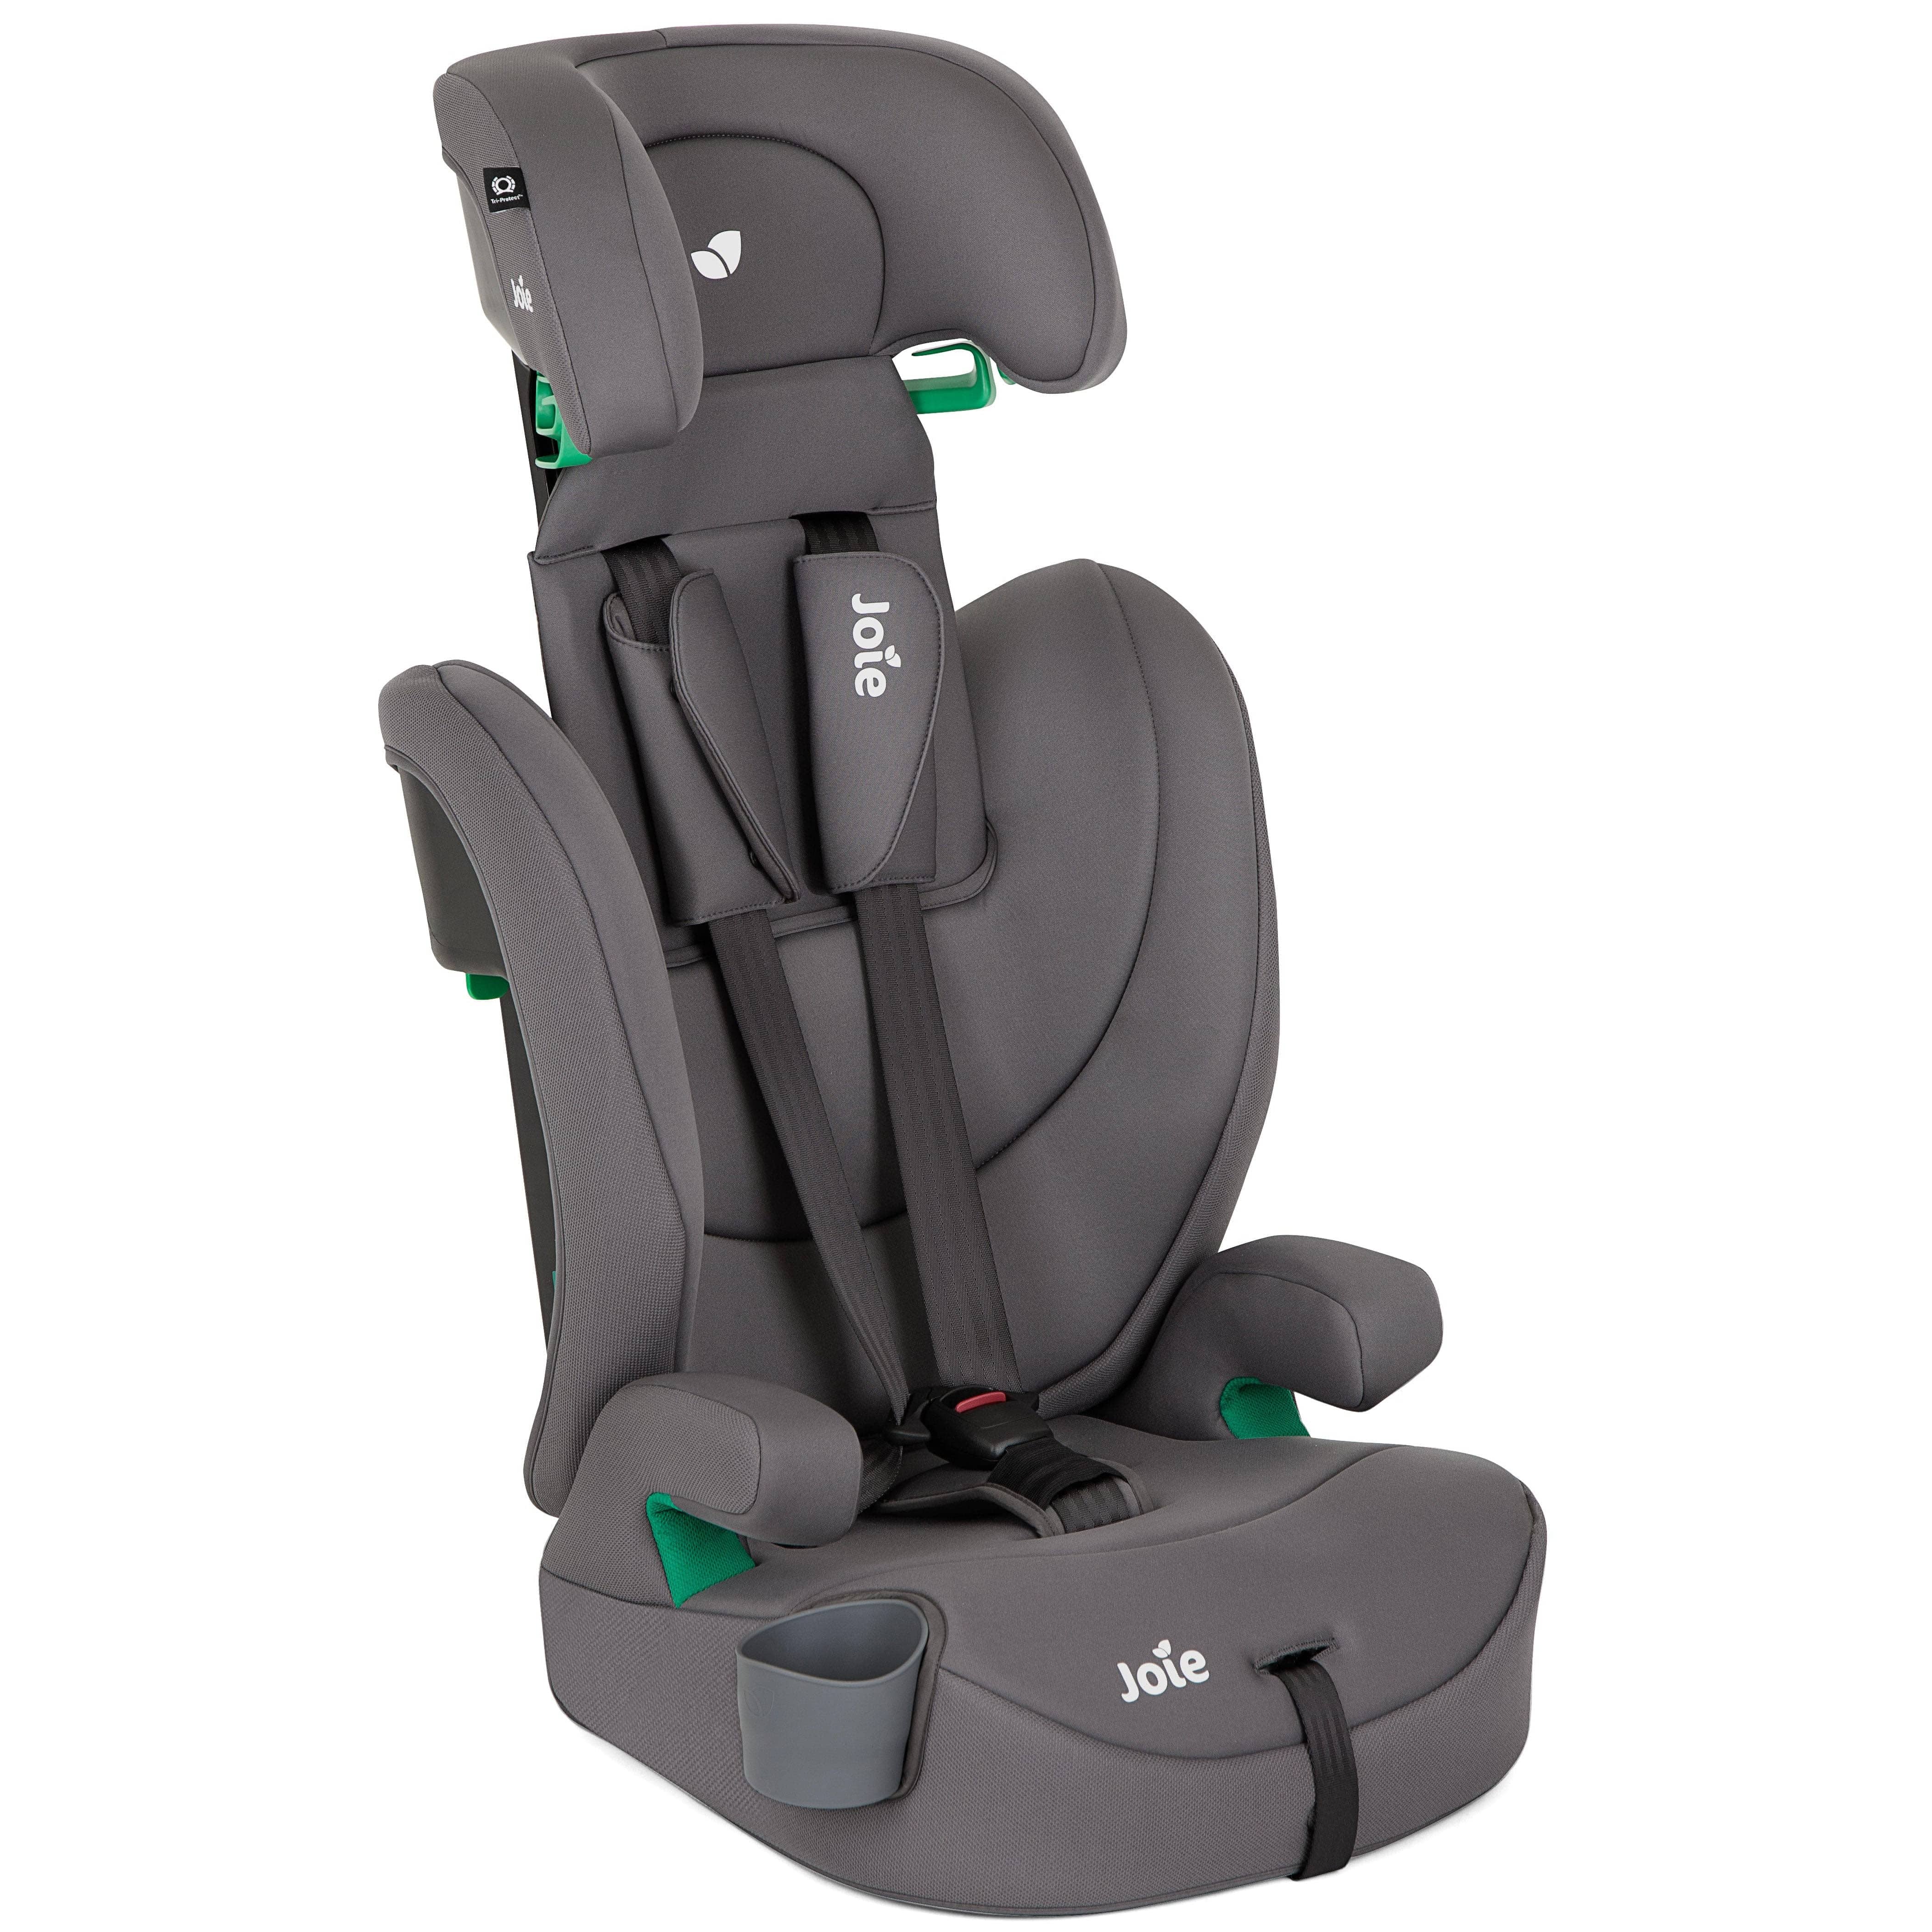 Joie combination car seats Joie Elevate R129 1/2/3 Car Seat - Thunder C2216AATHD000